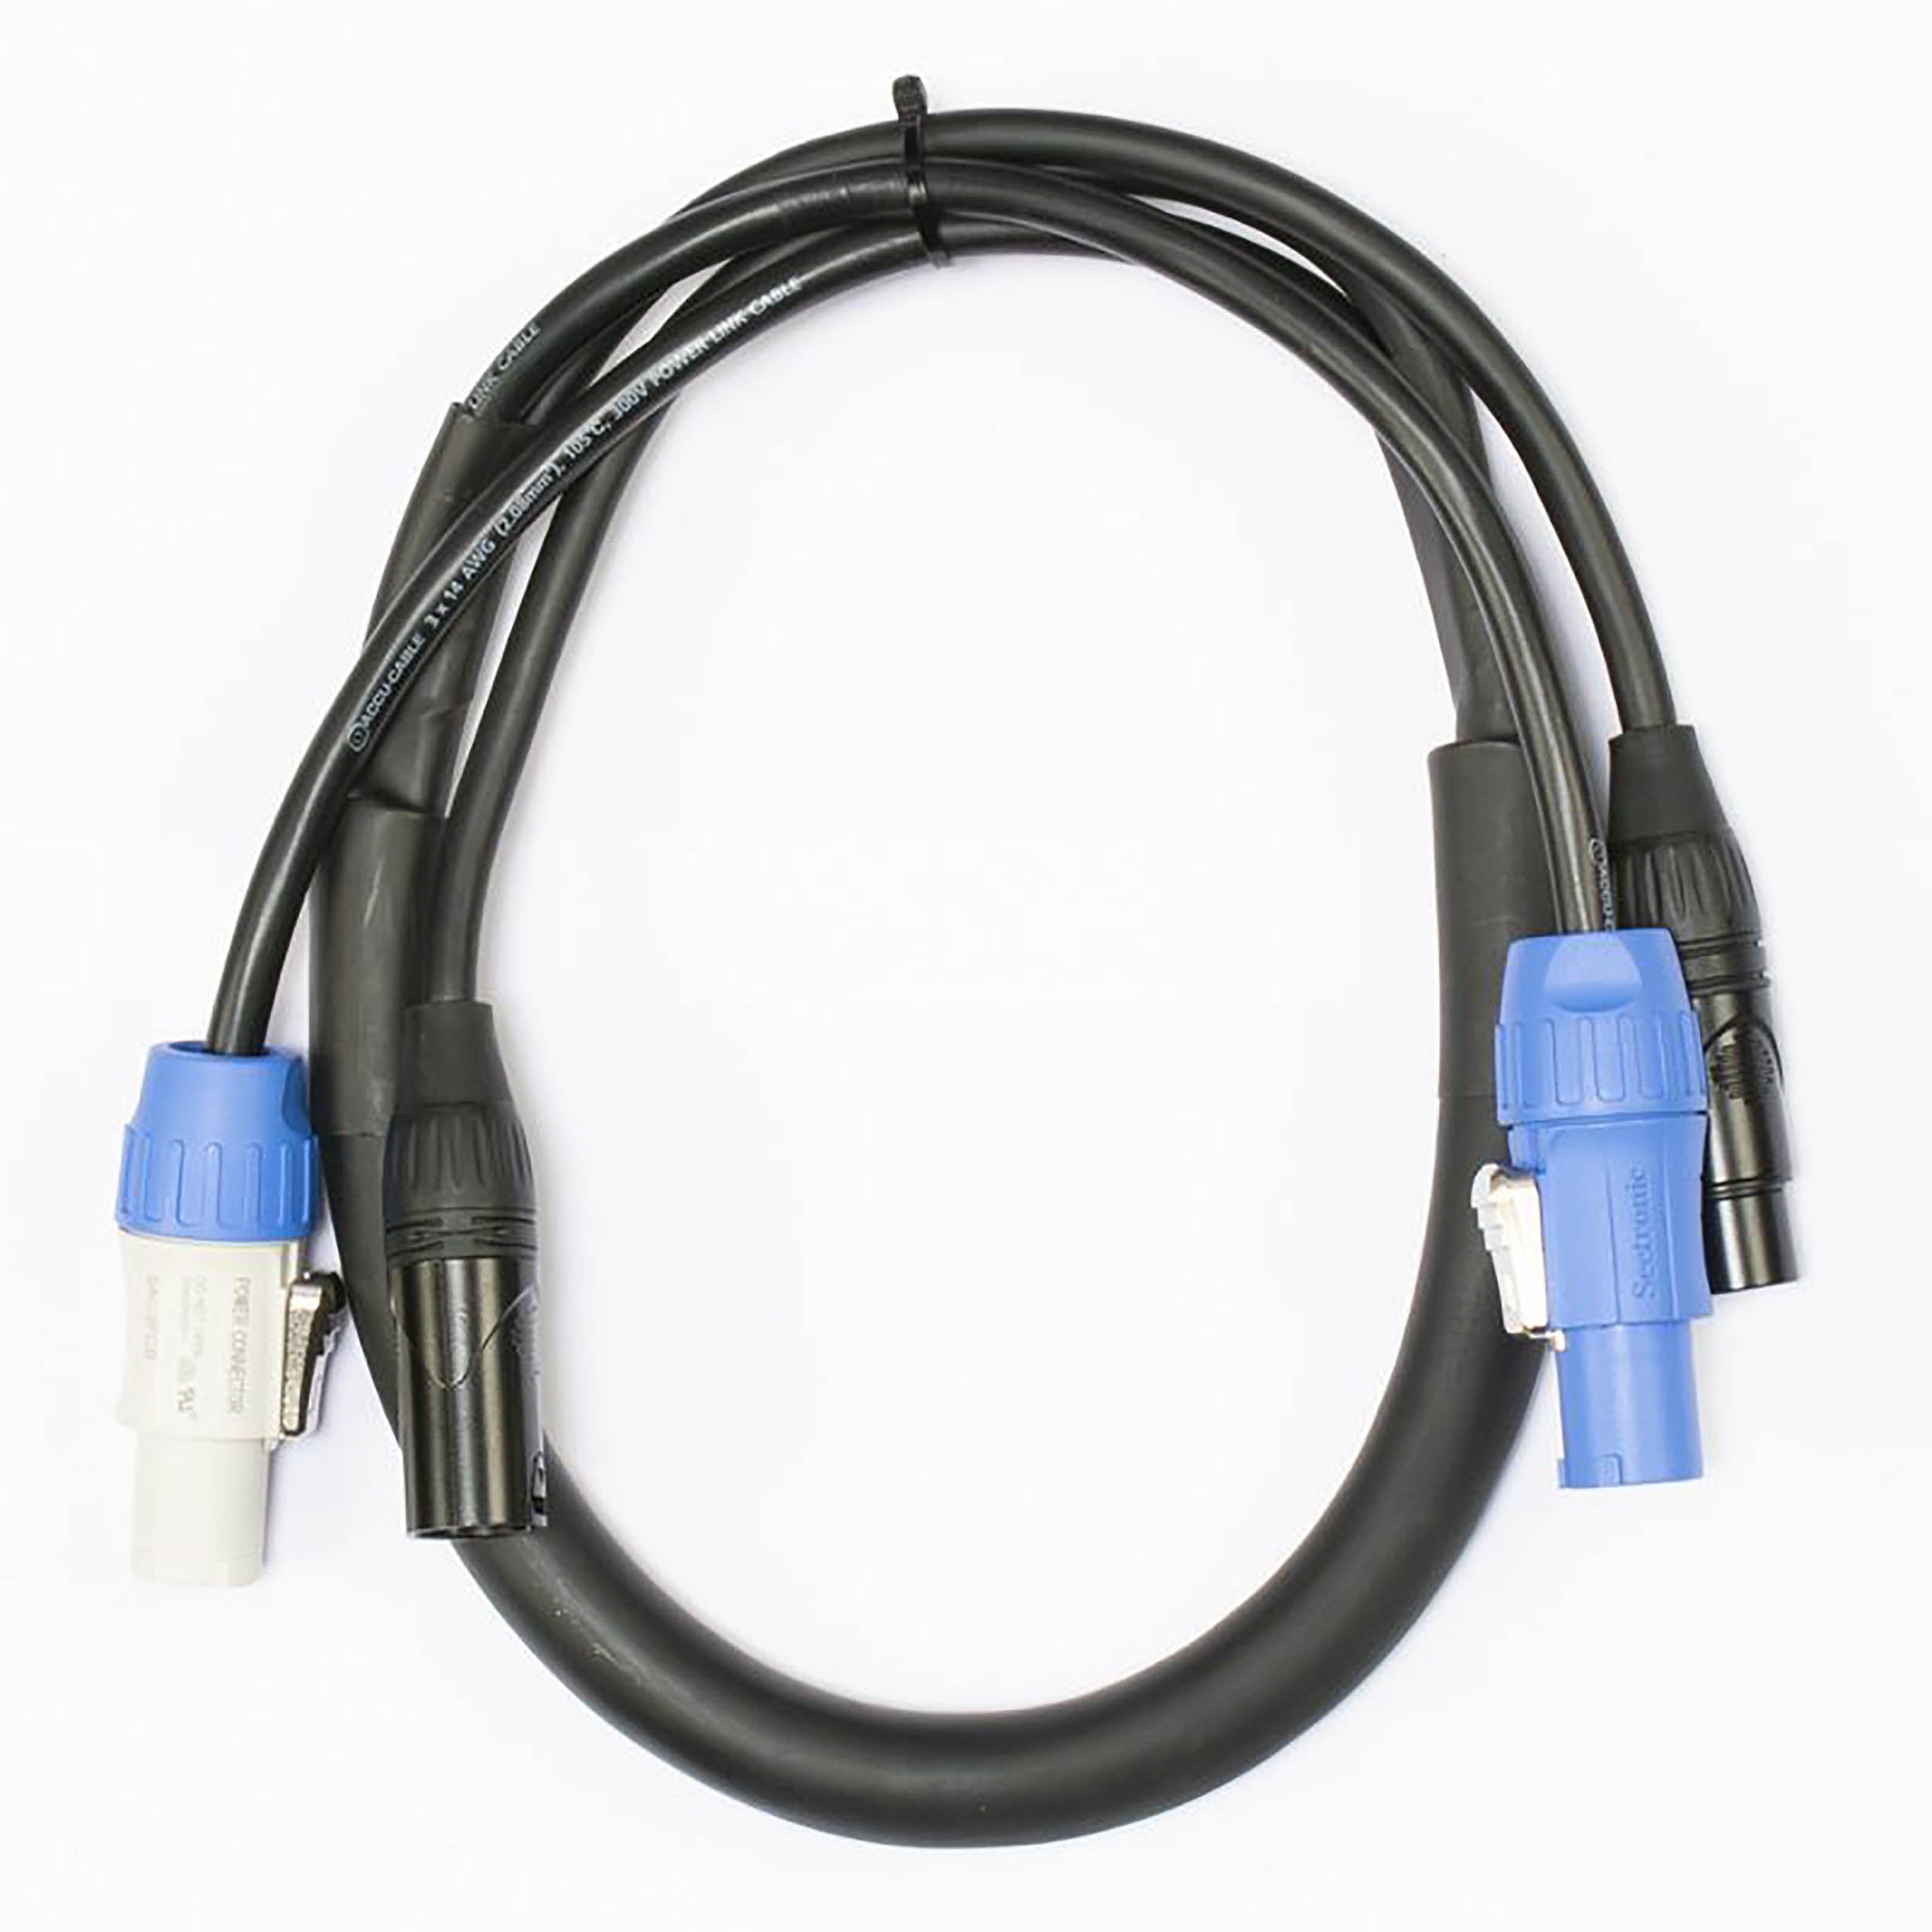 Accu-Cable AC5PPCON6, 5-Pin DMX & Locking Power Link Combo Cable - 6 Ft by Accu Cable